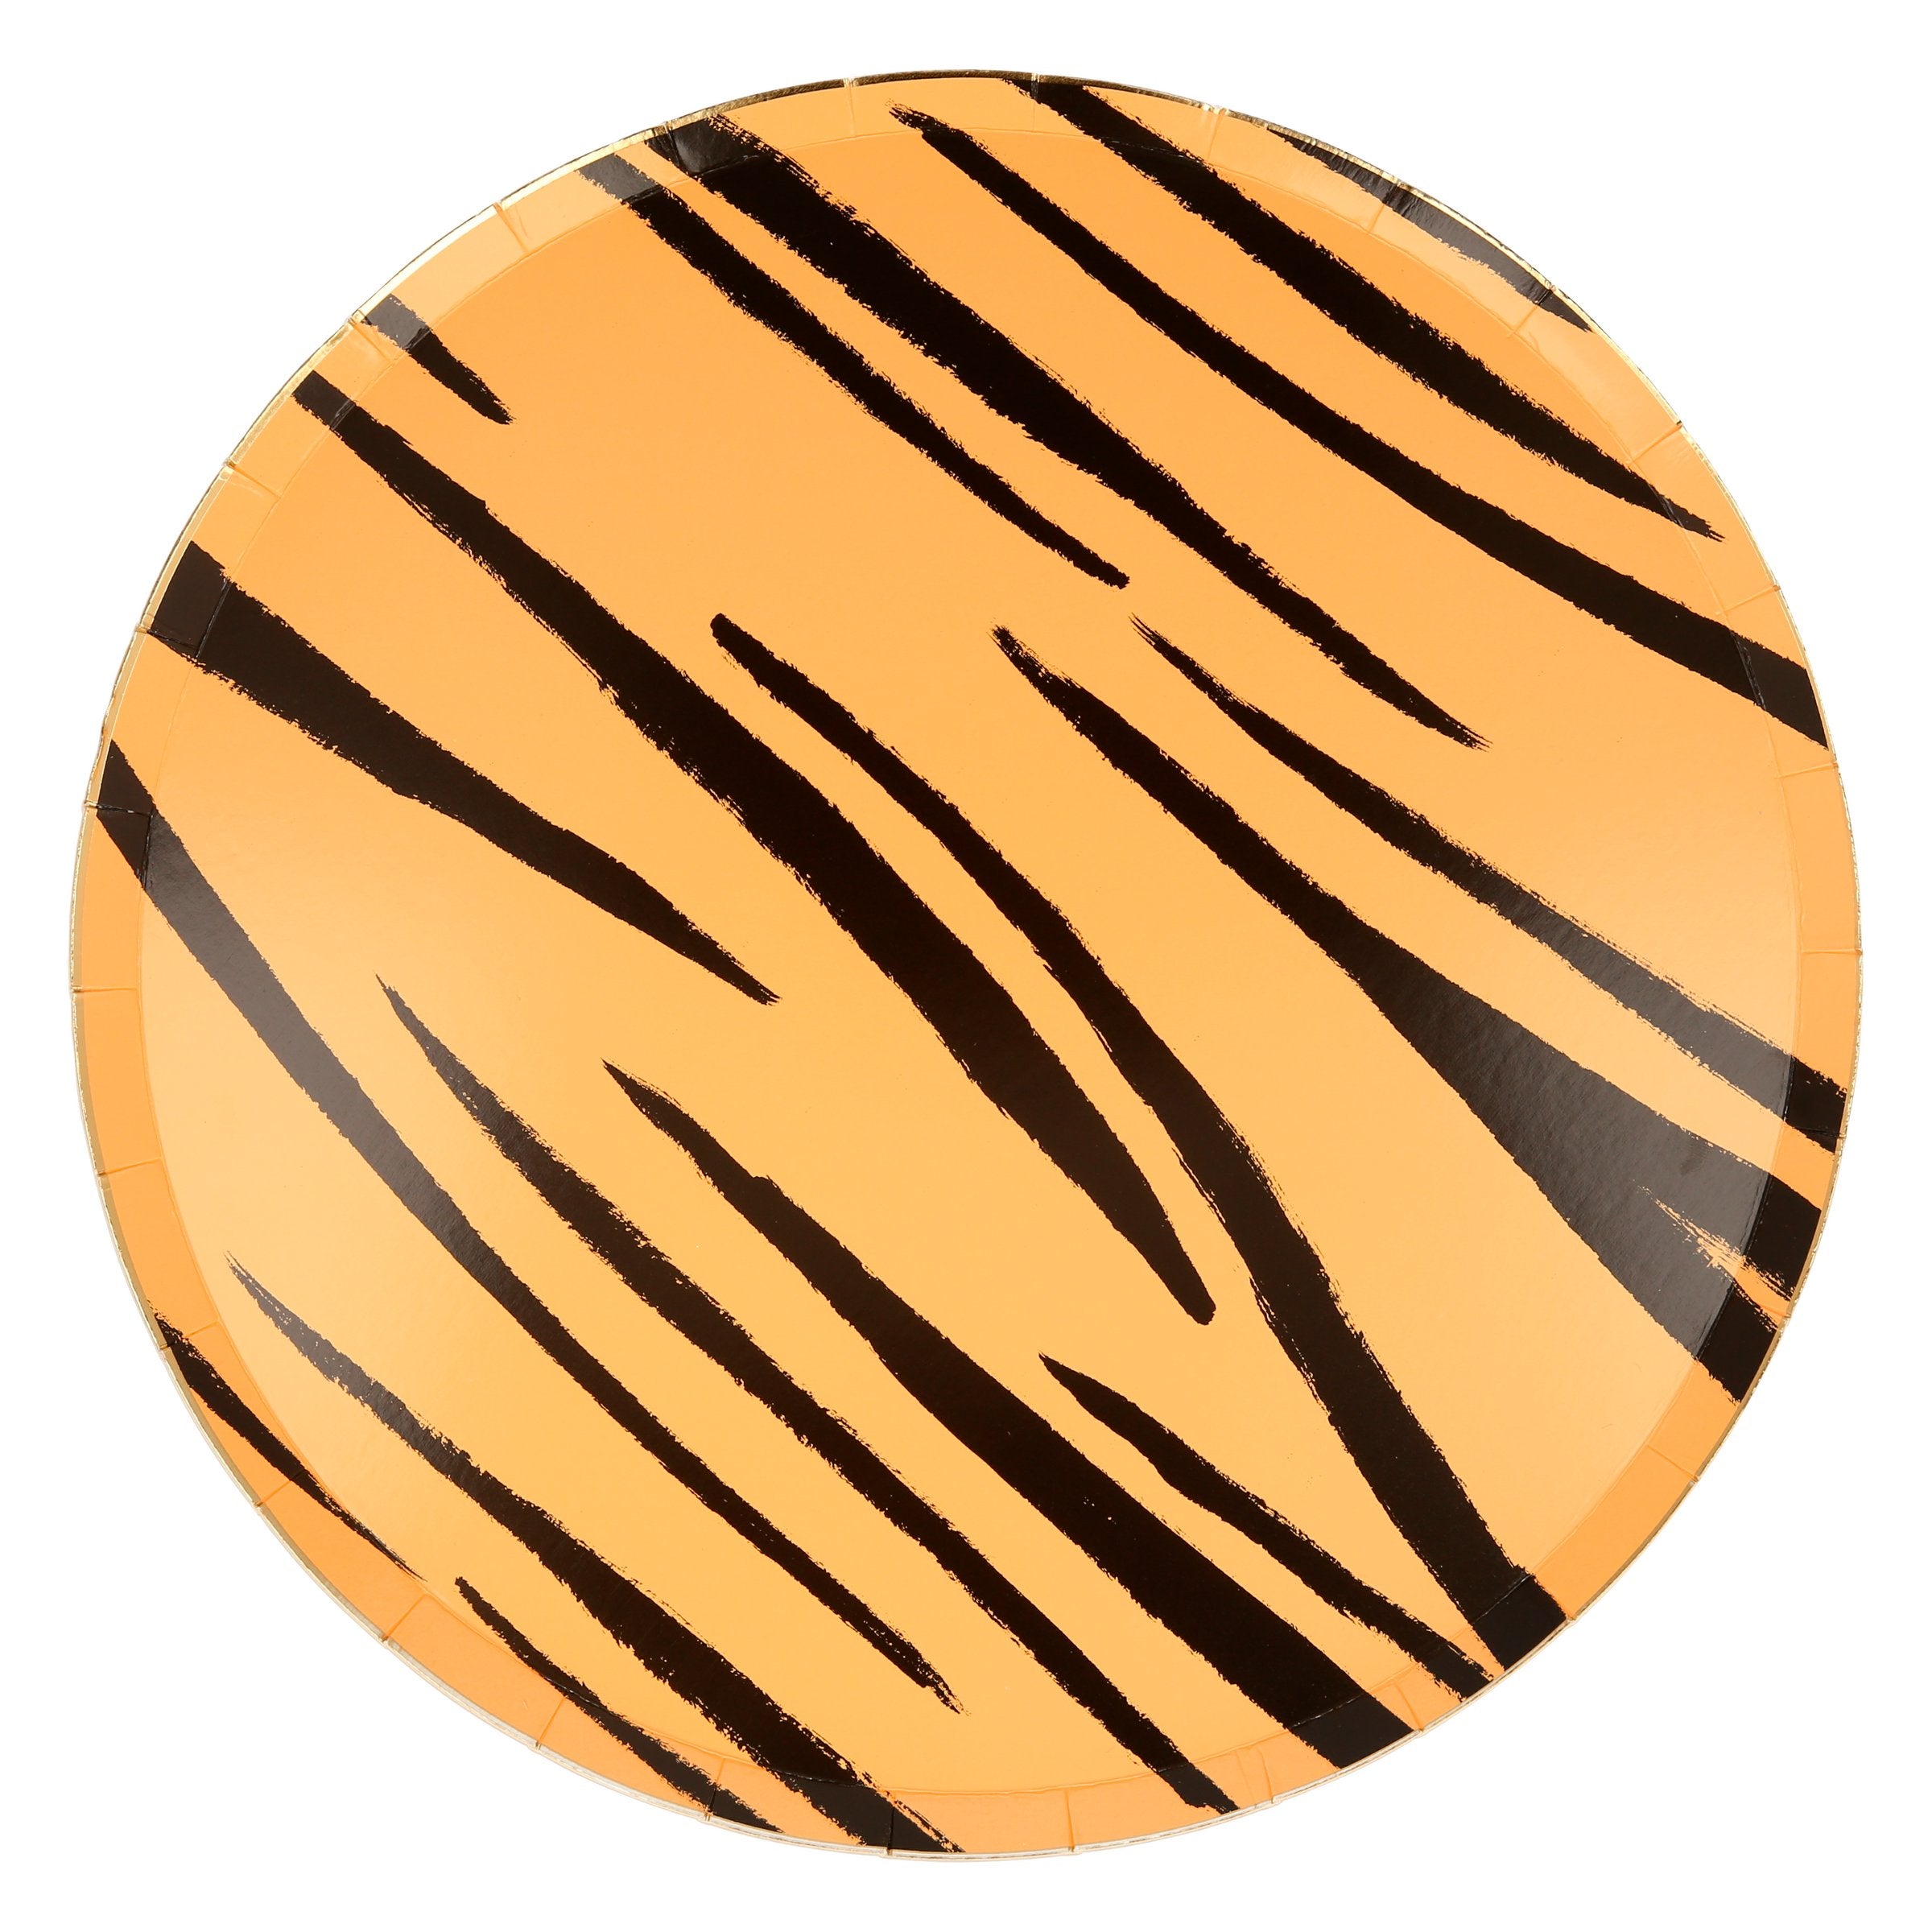 Our animal print dinner plates are fabulous paper plates for a safari party.